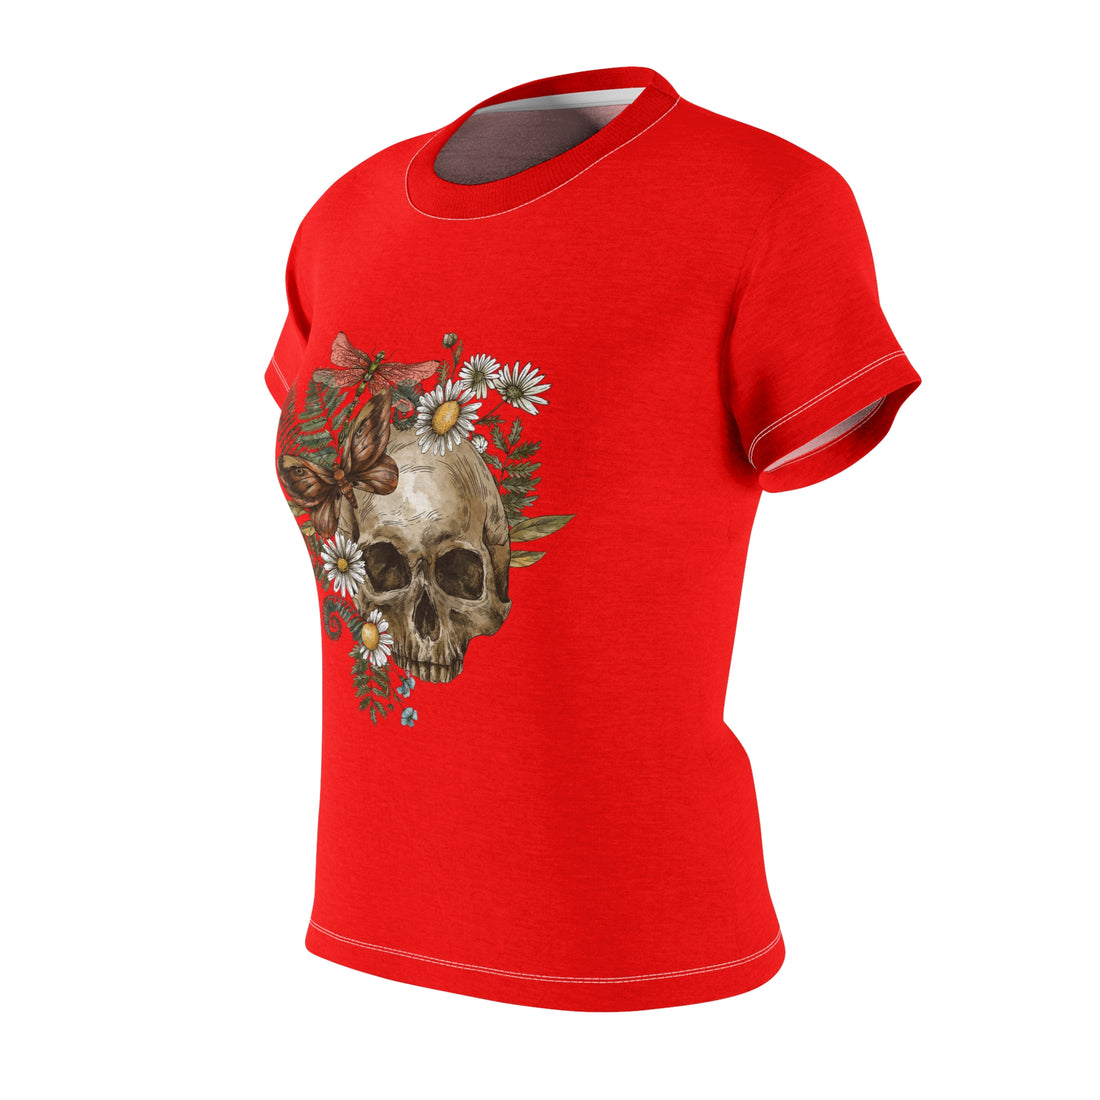 skull, floral & butterfly vintage print t-shirt for women